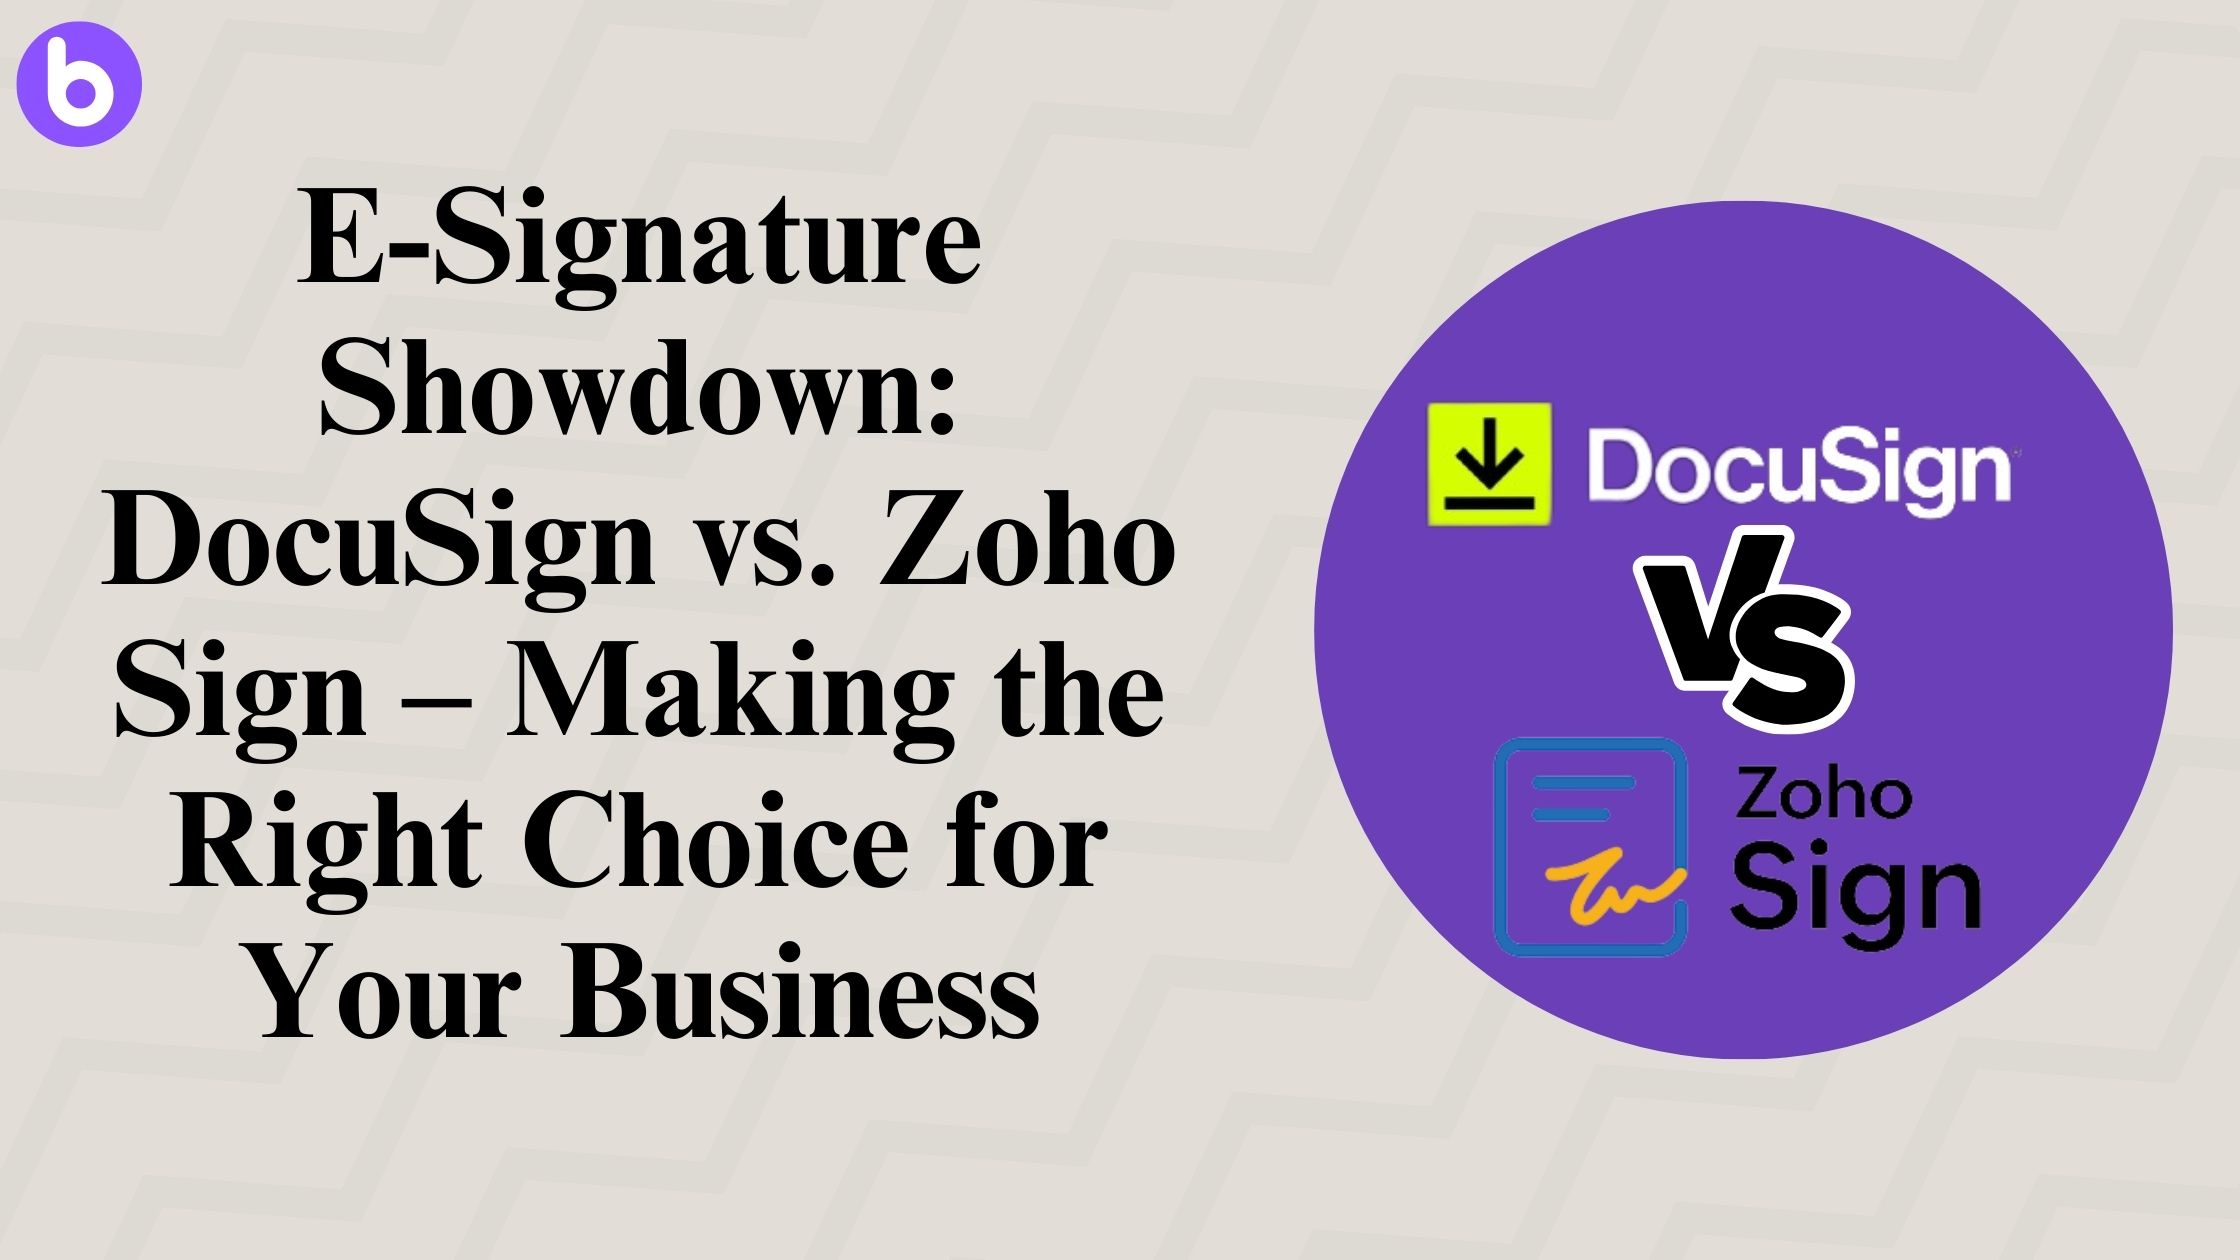 E-Signature Showdown: DocuSign vs. Zoho Sign – Making the Right Choice for Your Business